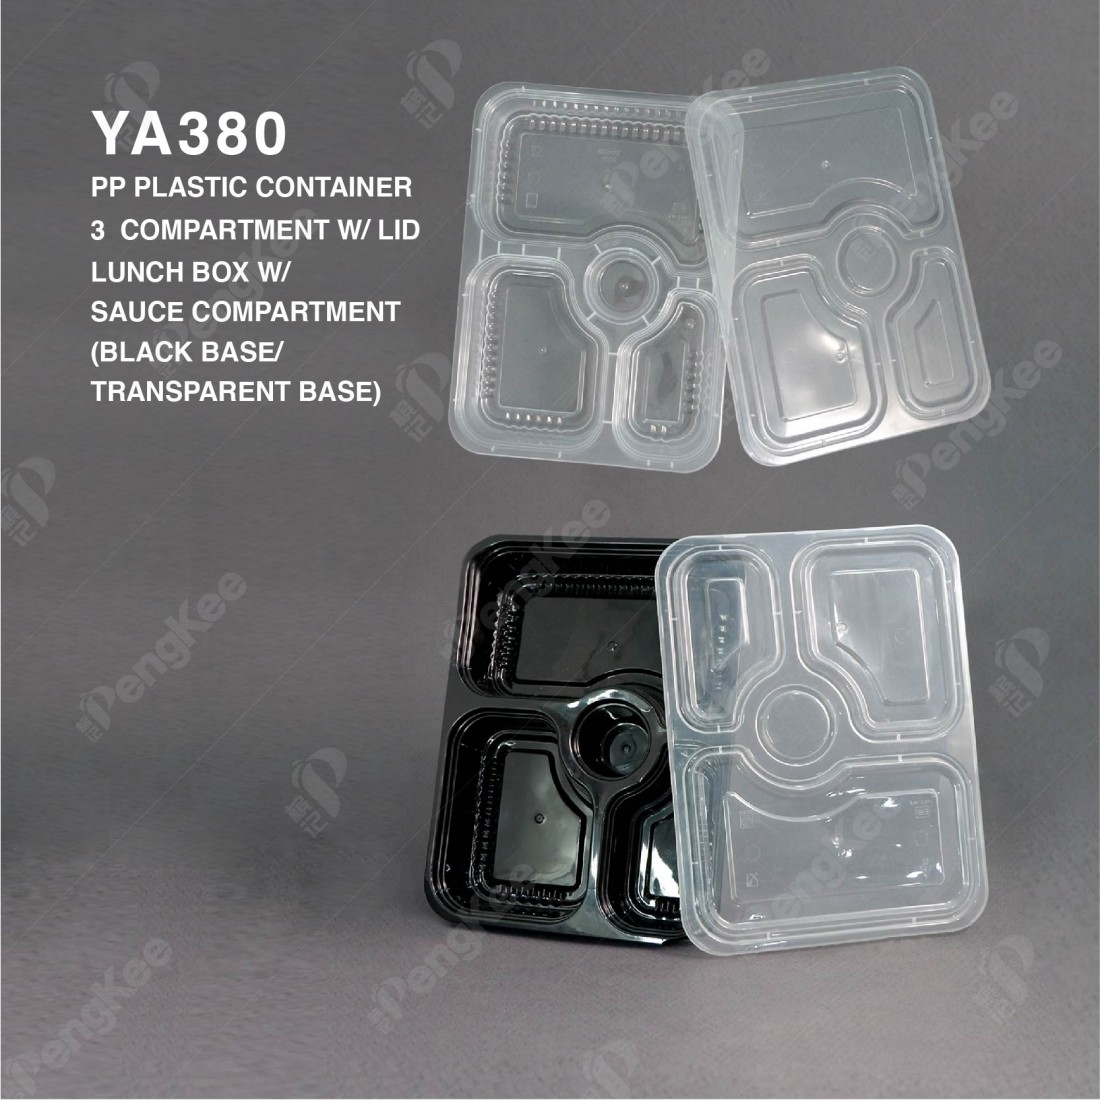  YA380 PP PLASTIC CONTAINER 3  COMPARTMENT LUNCH BOX WITH SAUCE COMPARTMENT (TRANSPARENT BASE) WITH LID